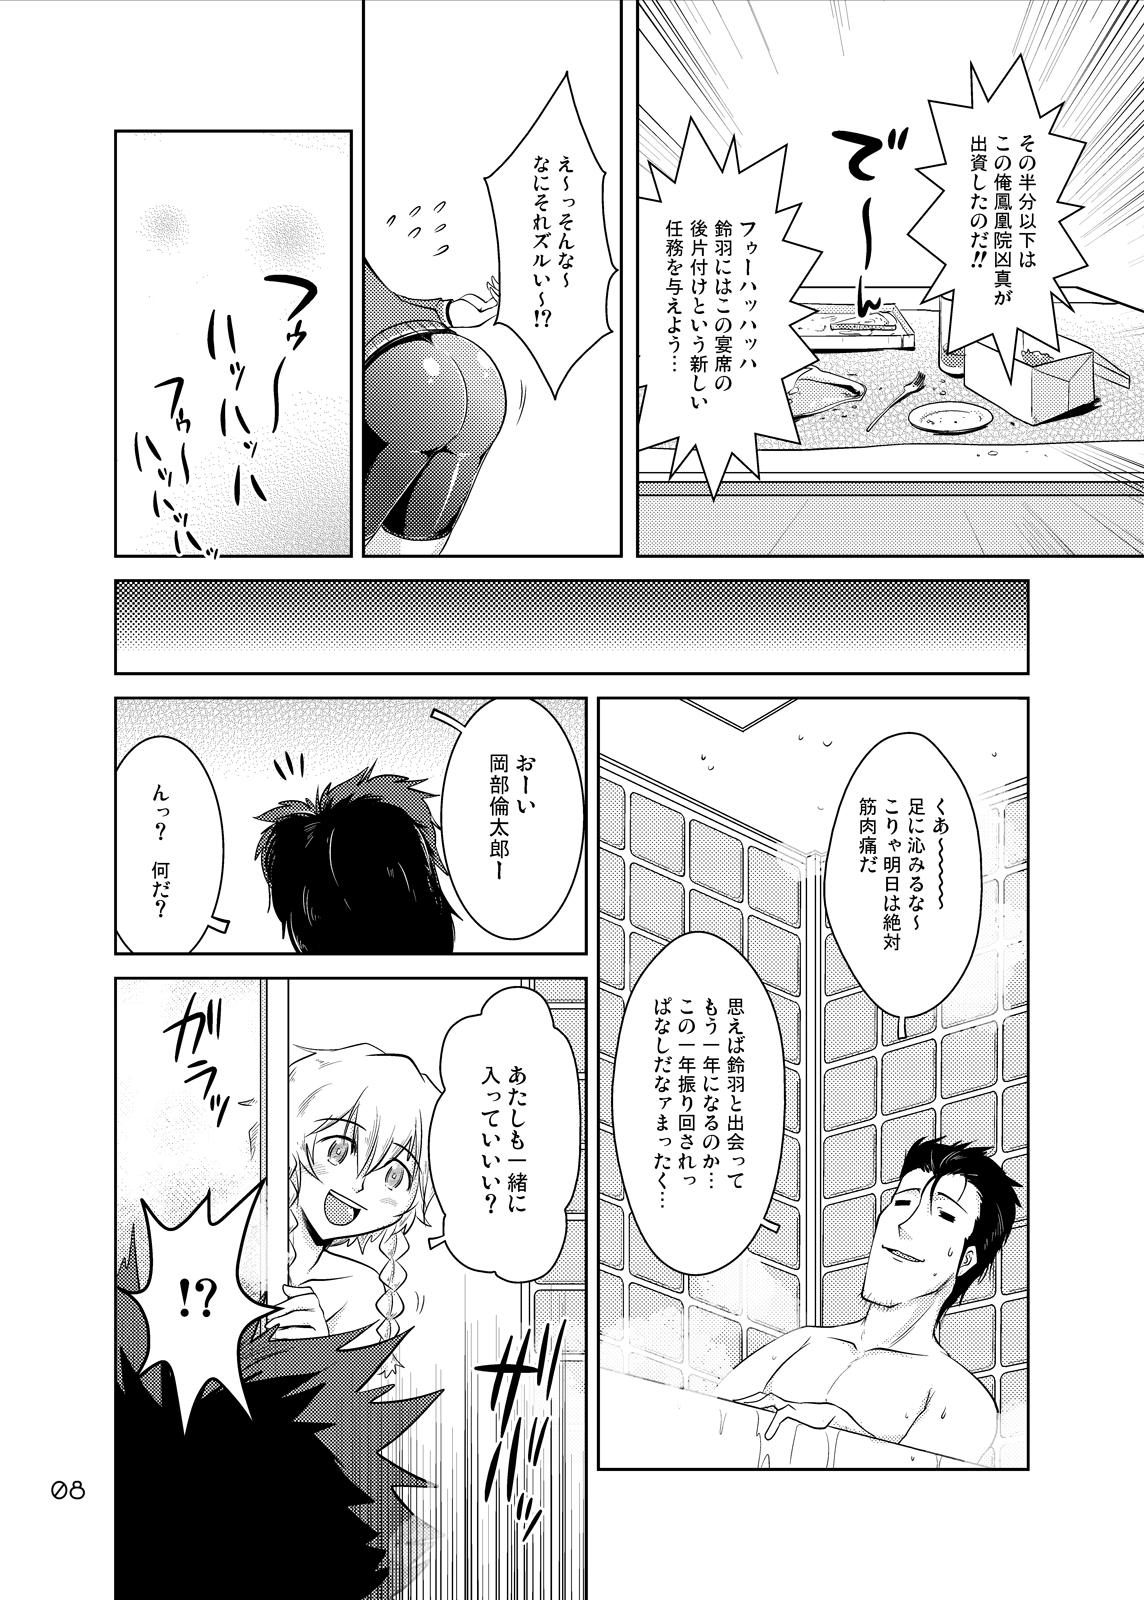 Fingers Spats;Gate PART4 Marvelous Big Bang - Steinsgate Nasty - Page 8